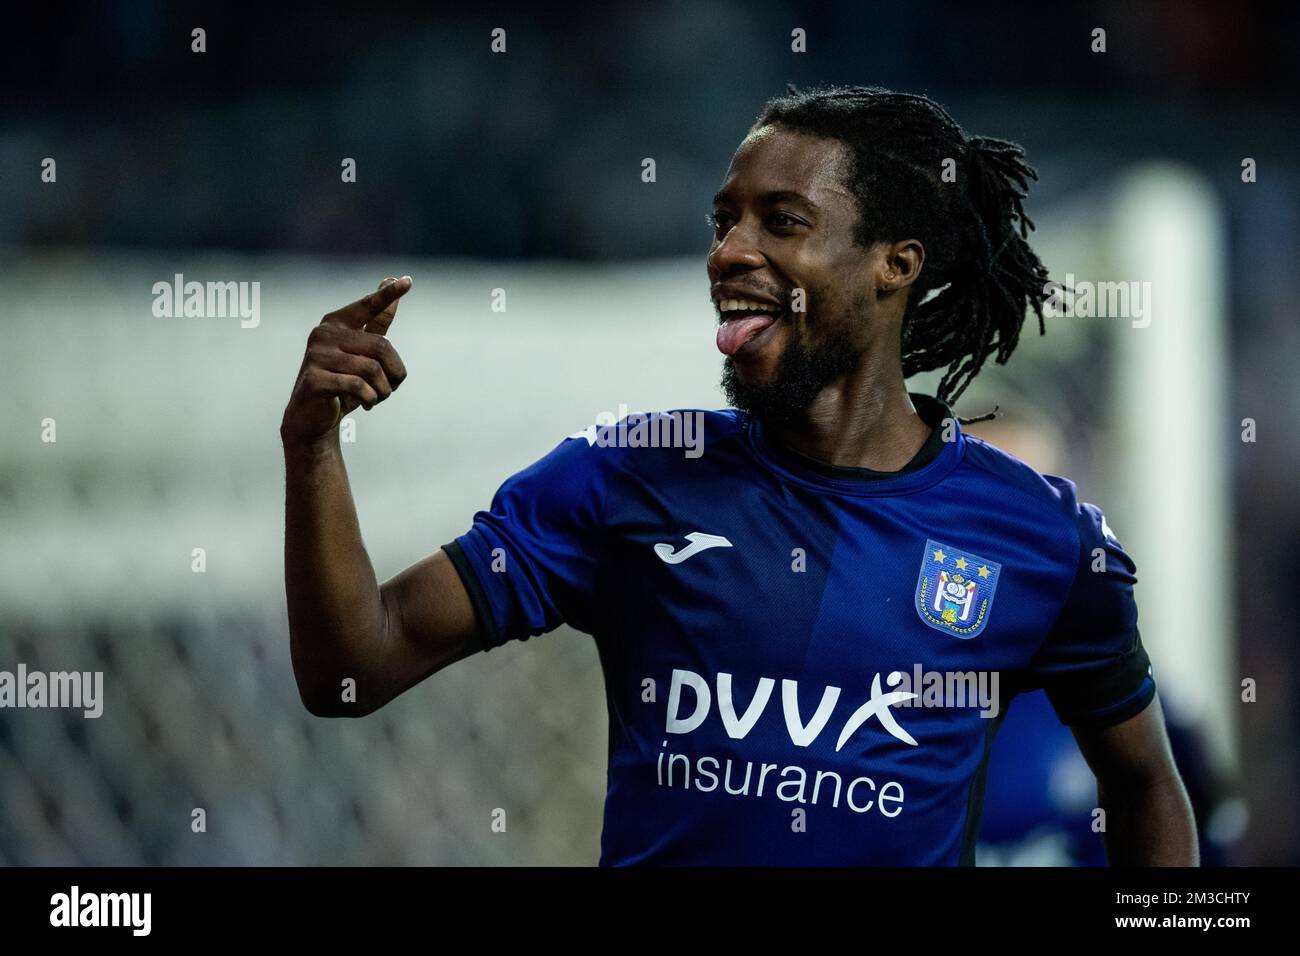 Anderlecht's Majeed Ashimeru celebrates after scoring during a soccer match between RSCA Anderlecht and KV Kortrijk, Sunday 18 September 2022 in Anderlecht, on day 9 of the 2022-2023 'Jupiler Pro League' first division of the Belgian championship. BELGA PHOTO JASPER JACOBS Stock Photo